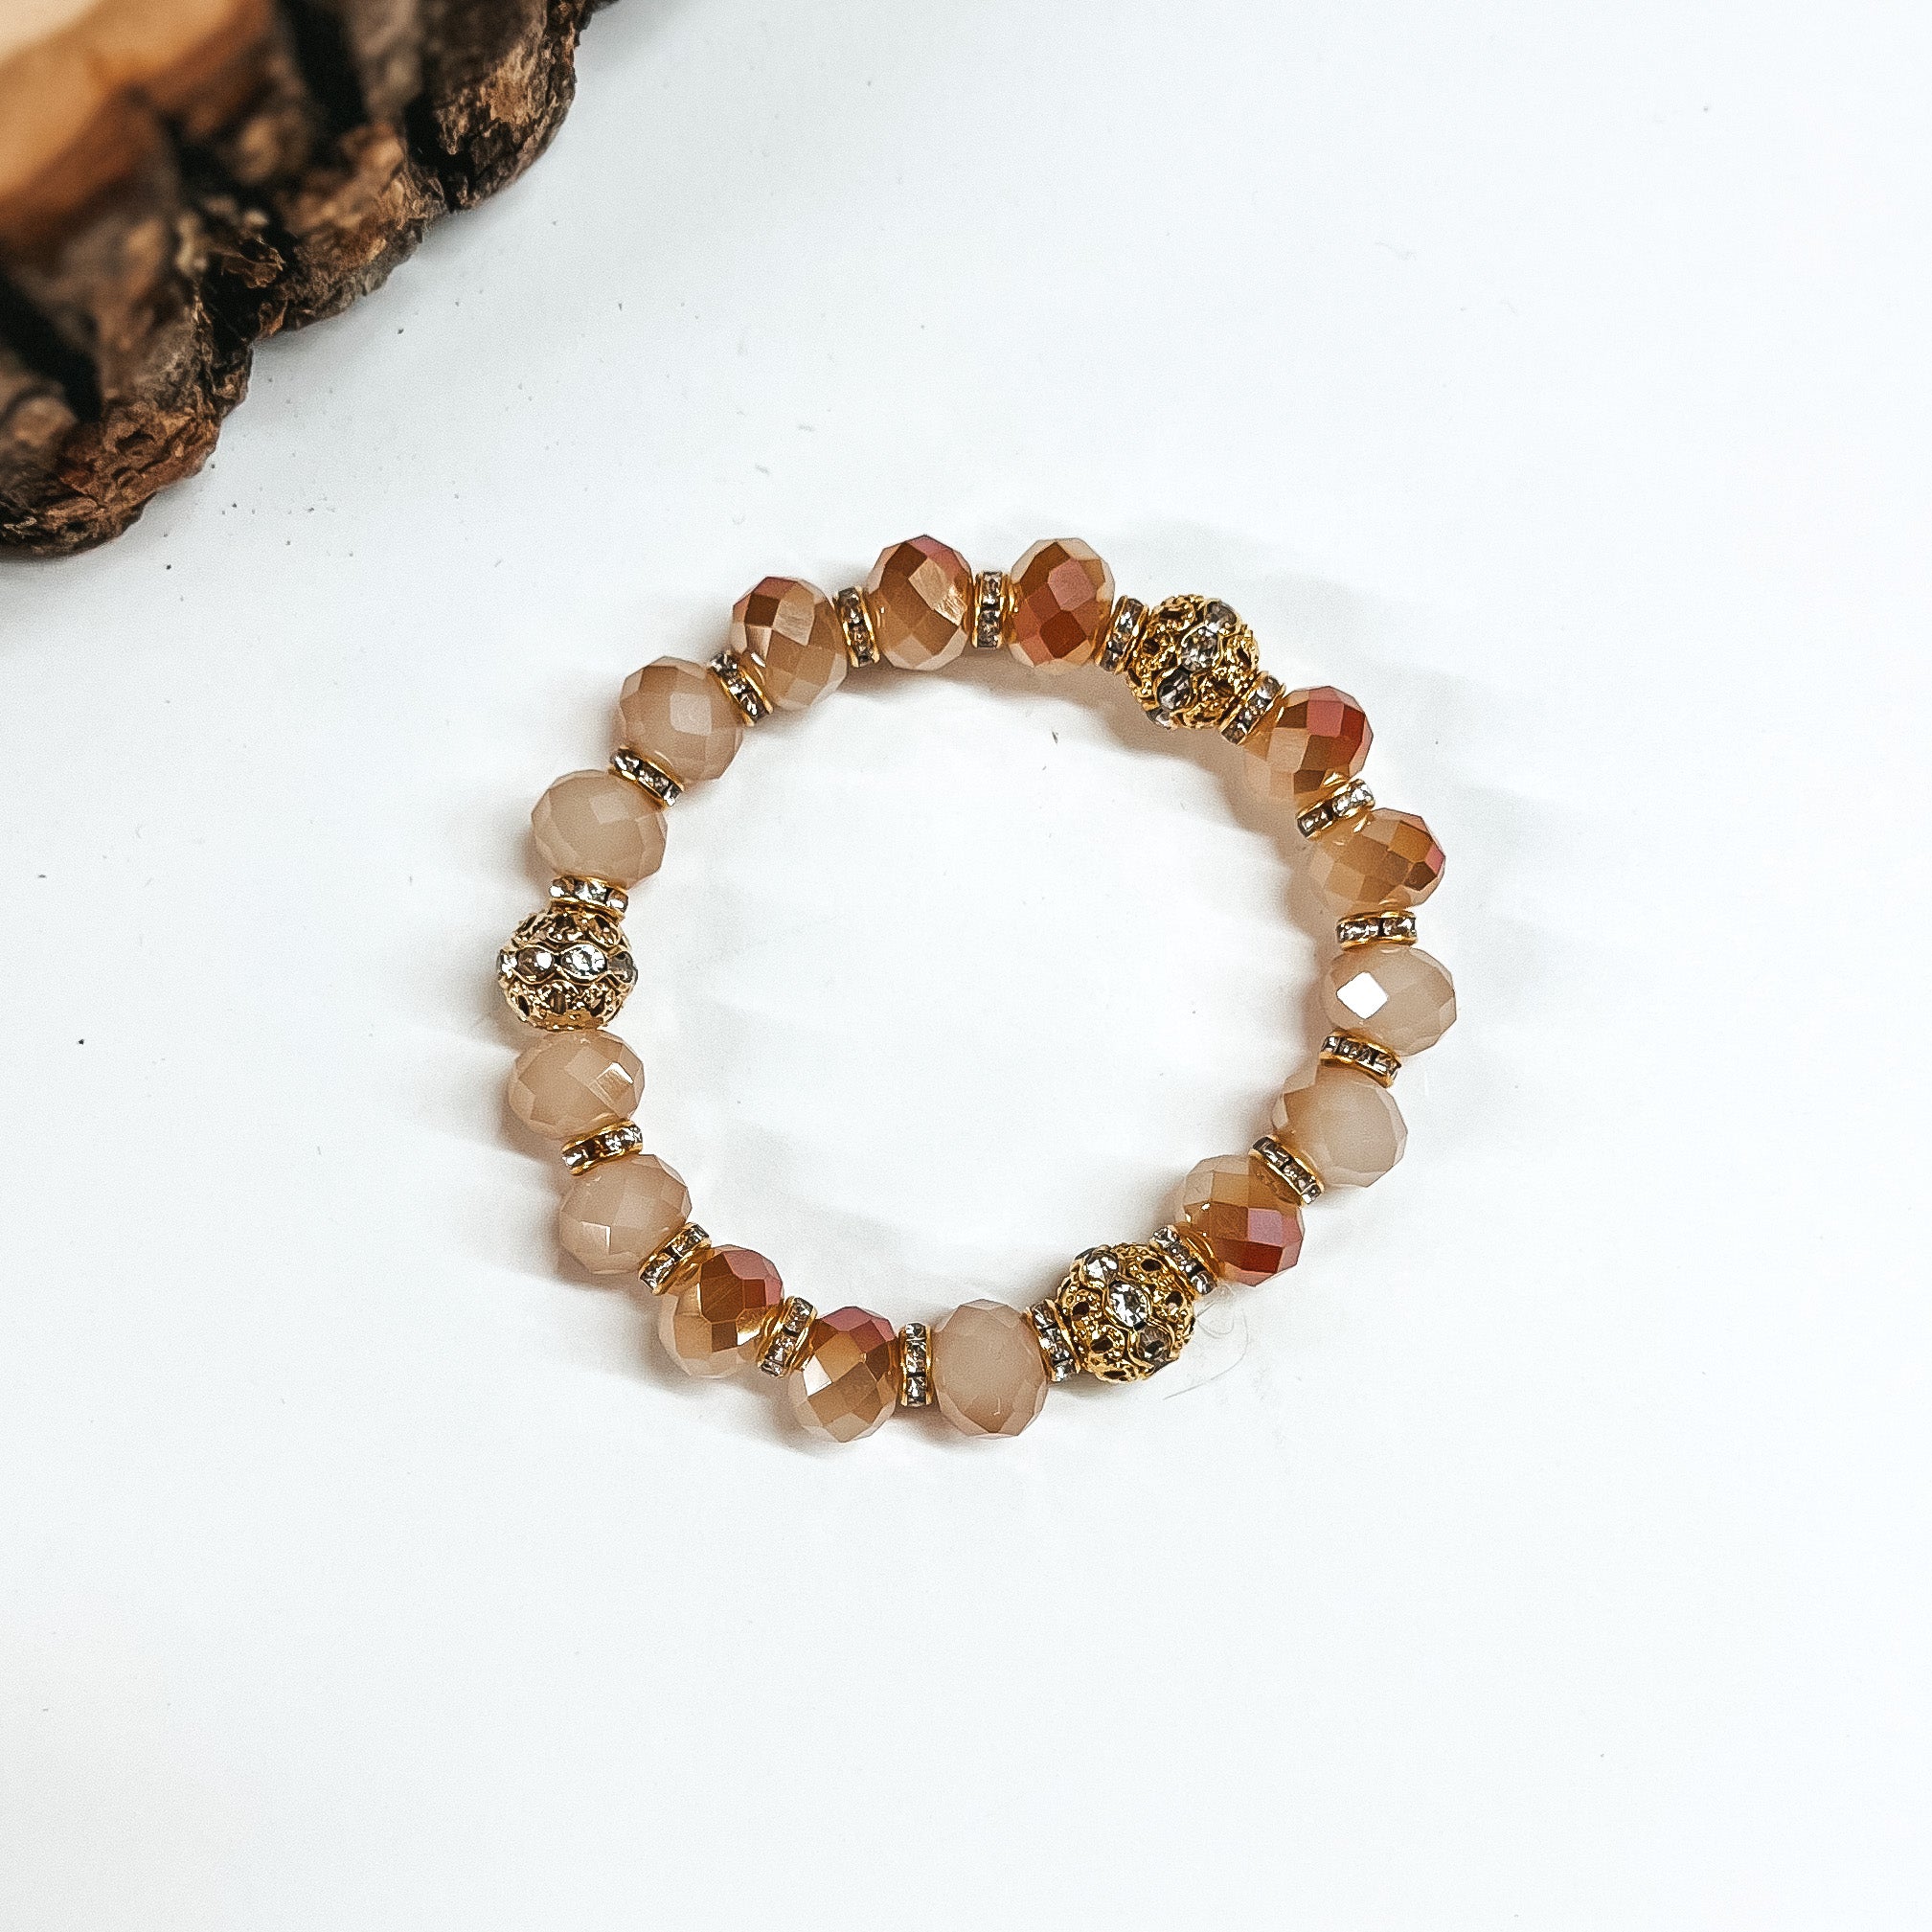 This is light brown crystal beaded bracelets with gold spacers.  The gold spacers have clear crystals in them and there are three gold and  crystals beads.This bracelet is taken on white background.